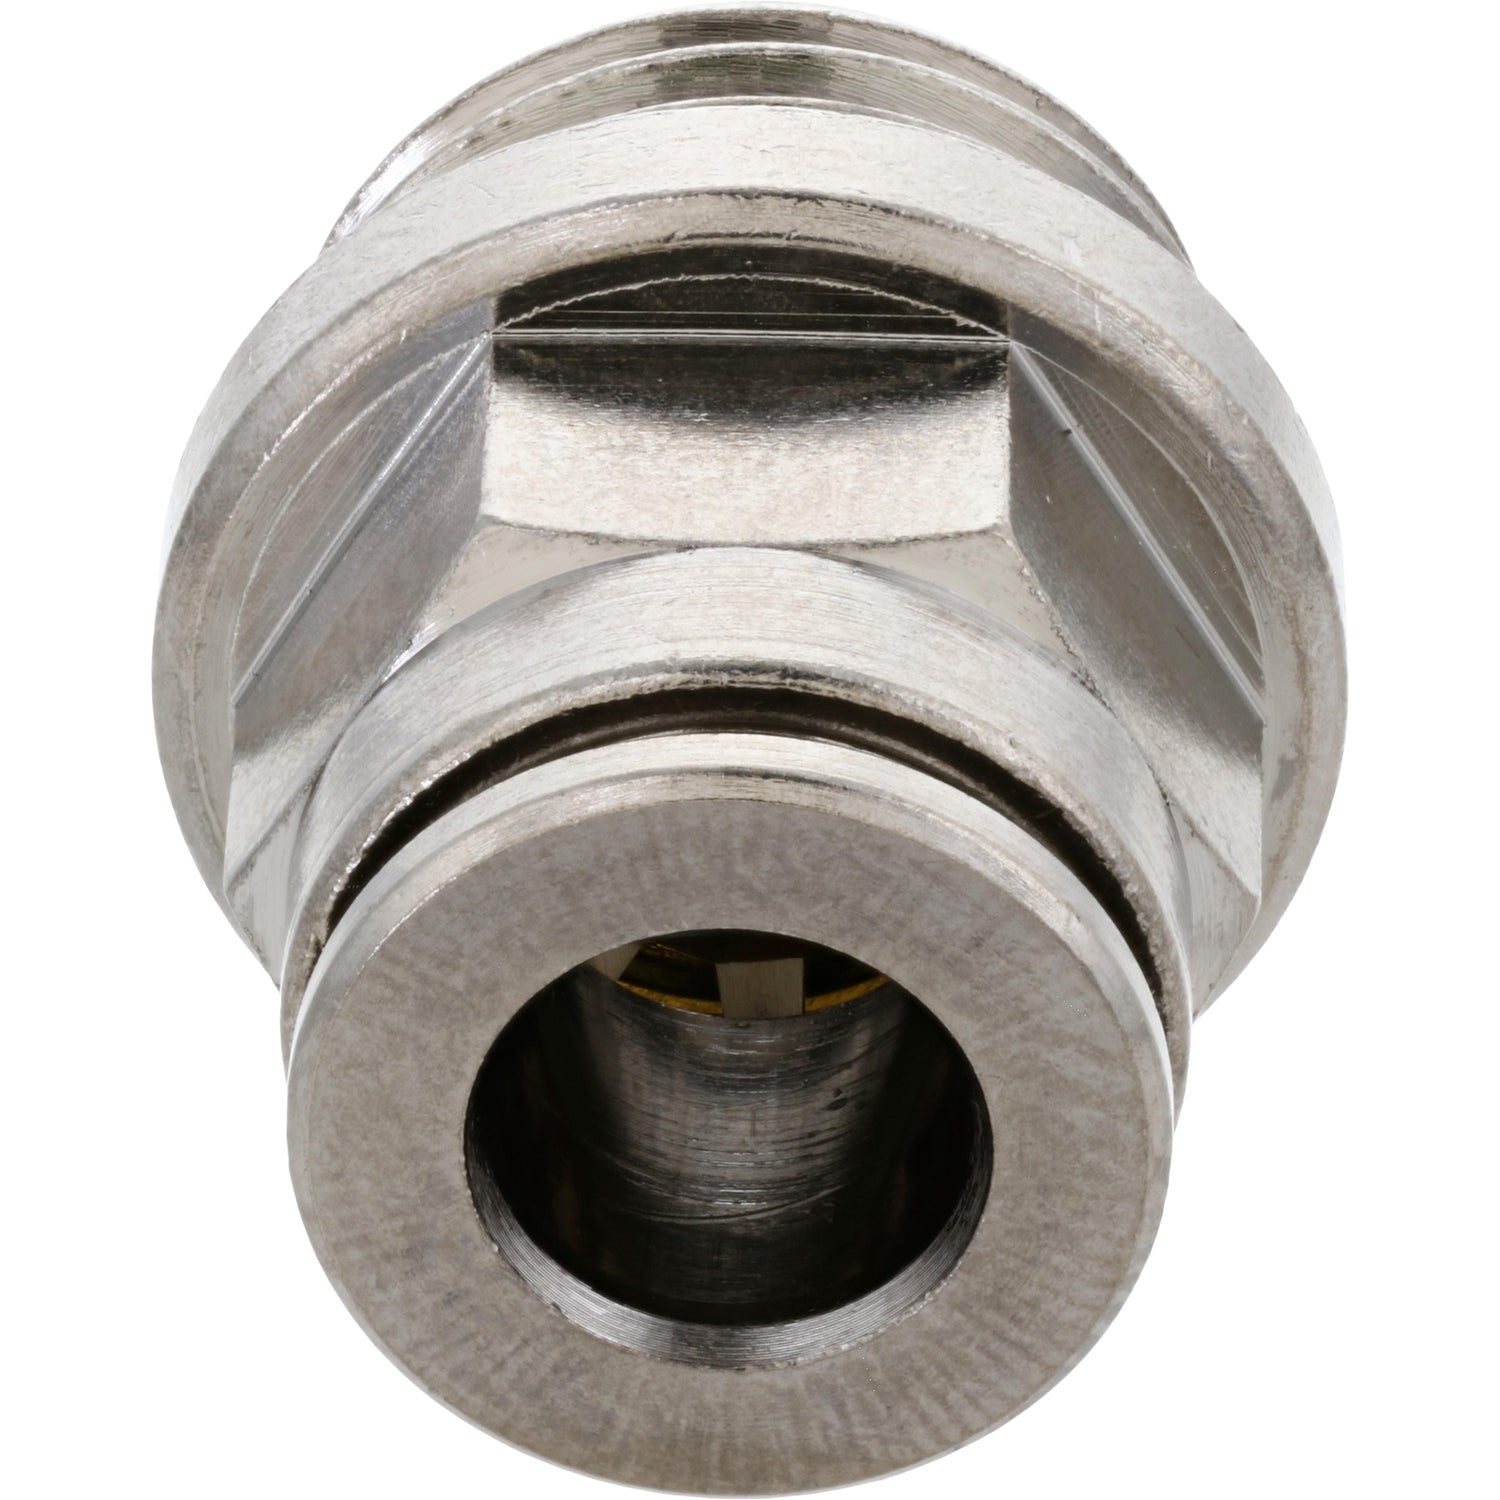 Nickel-Plated push-in fitting with push collar and threads. Part shown on white background.